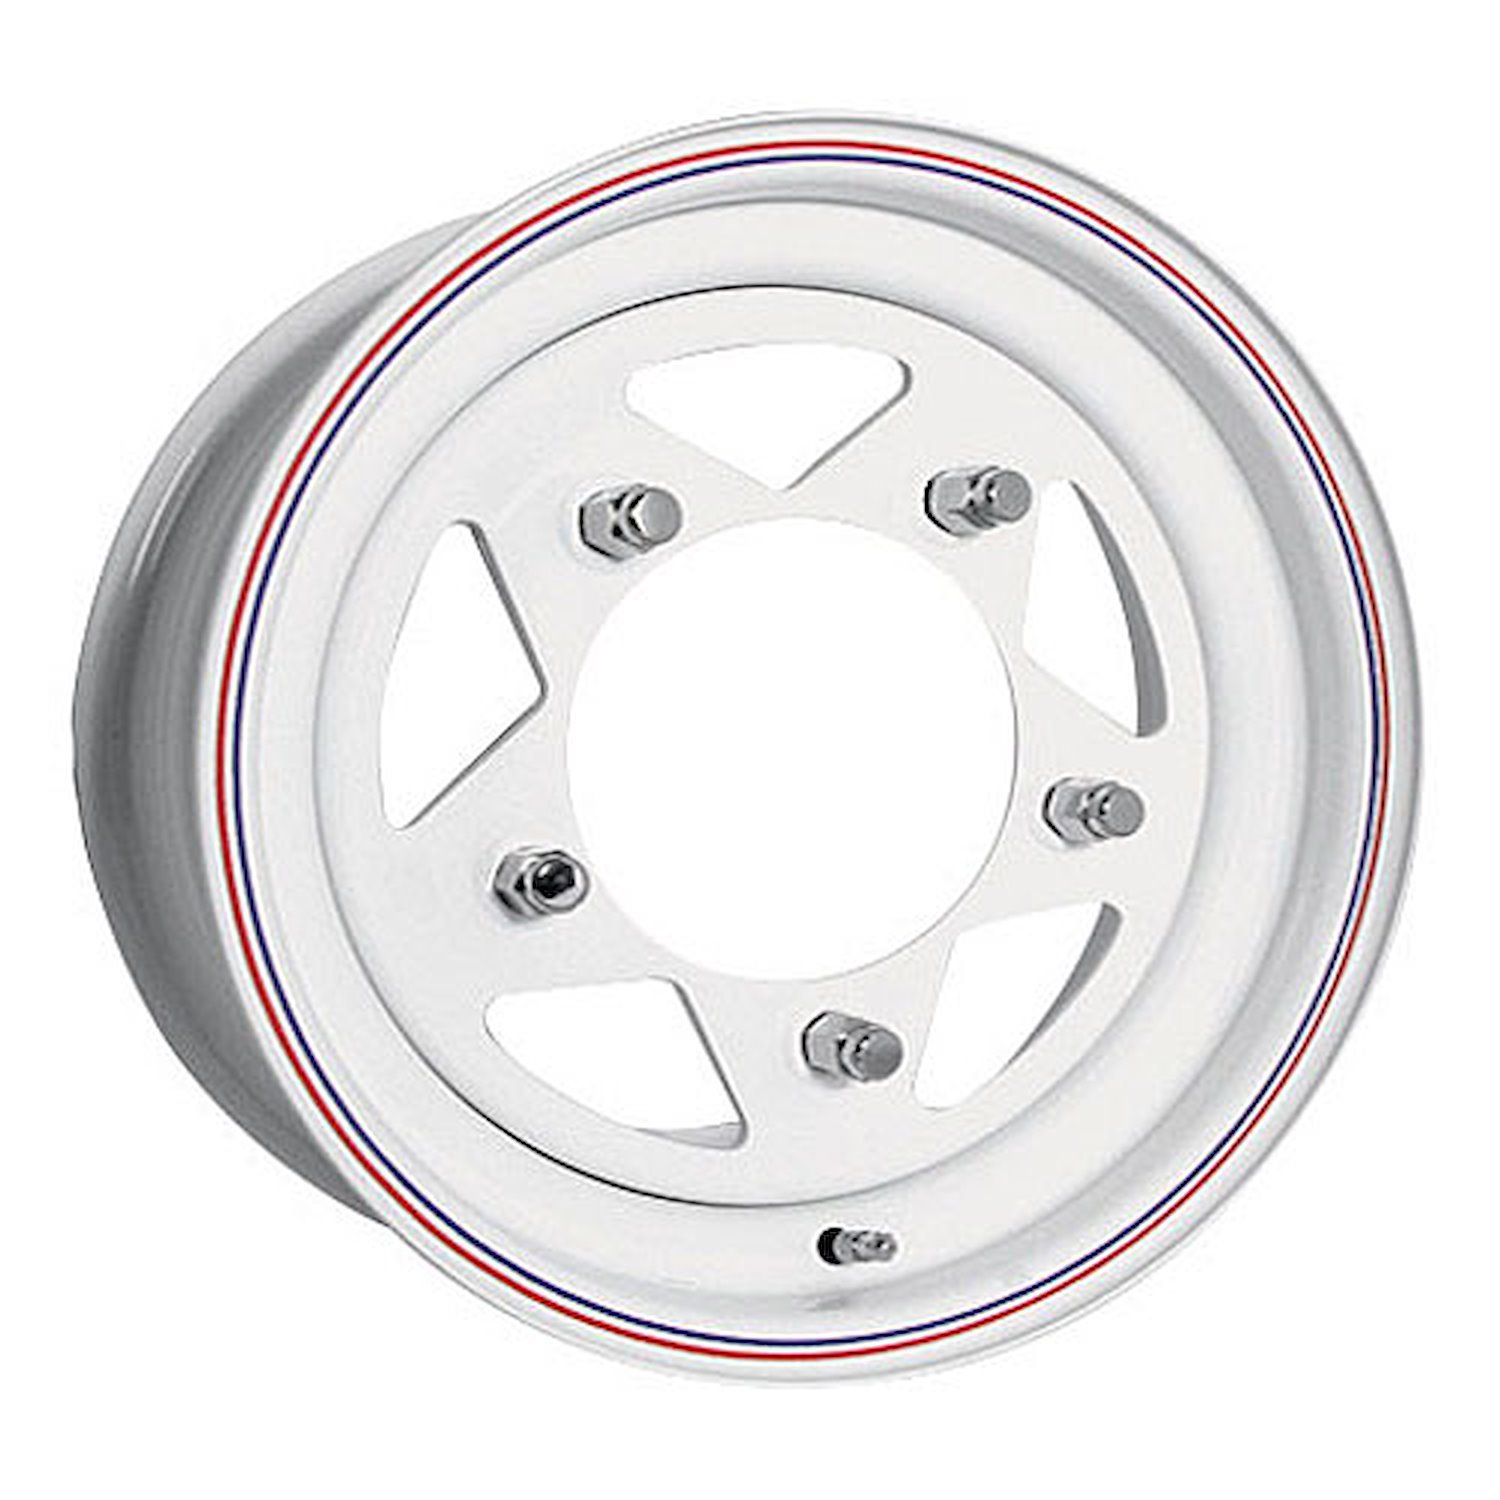 WHITE BAJA STAR VW 15 x 5 5 x 205 Bolt Circle 2875 Back Spacing 3 offset 160 Center Bore 1100 lbs Load Rating